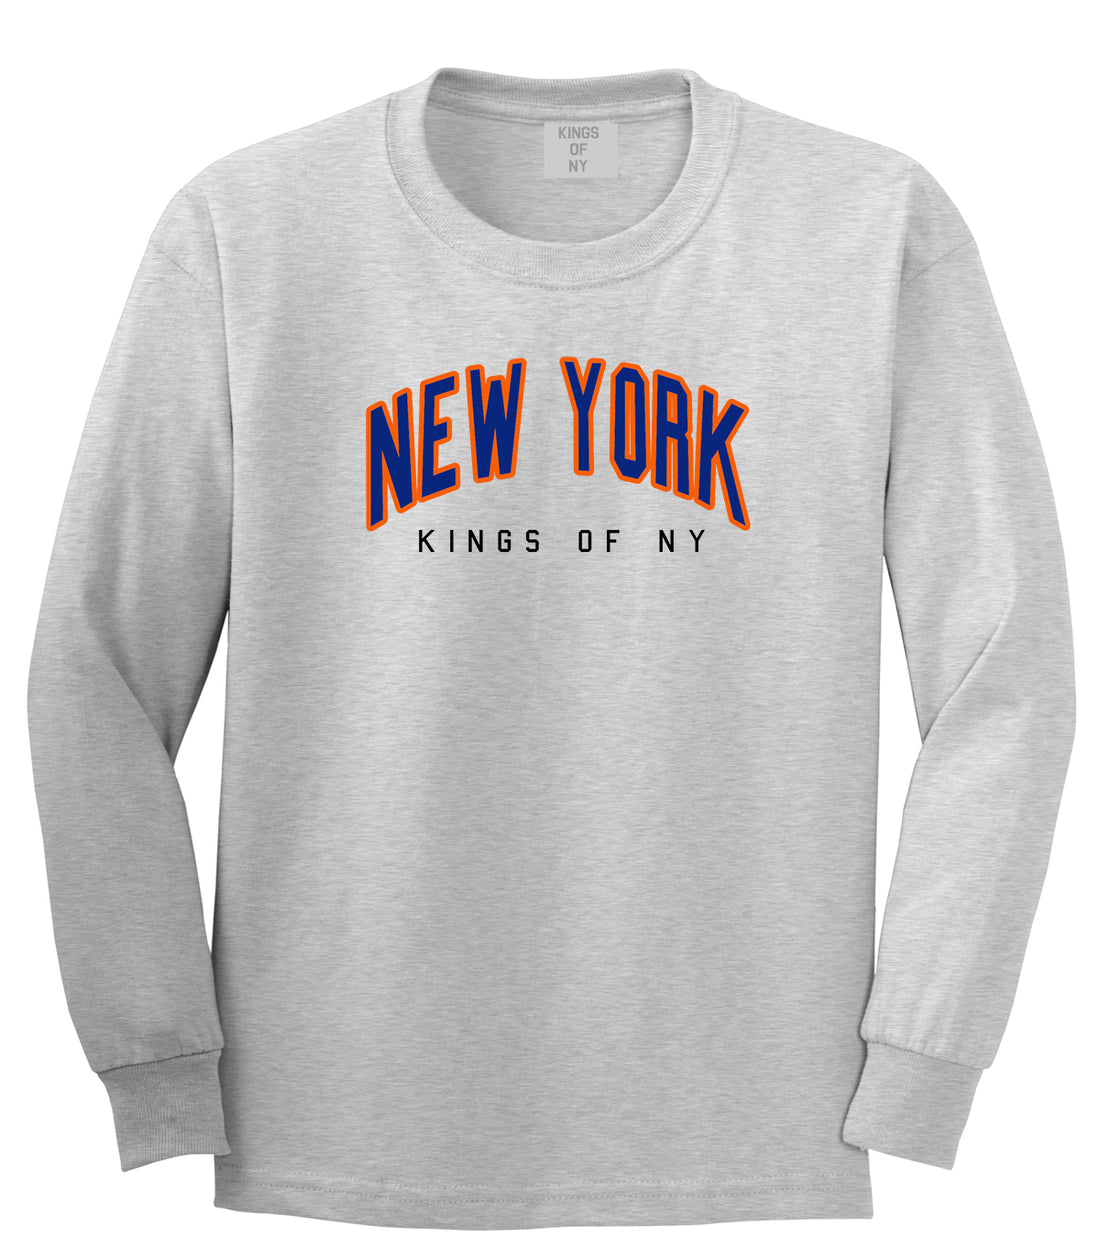 New York Blue And Orange Mens Long Sleeve T-Shirt Grey by Kings Of NY